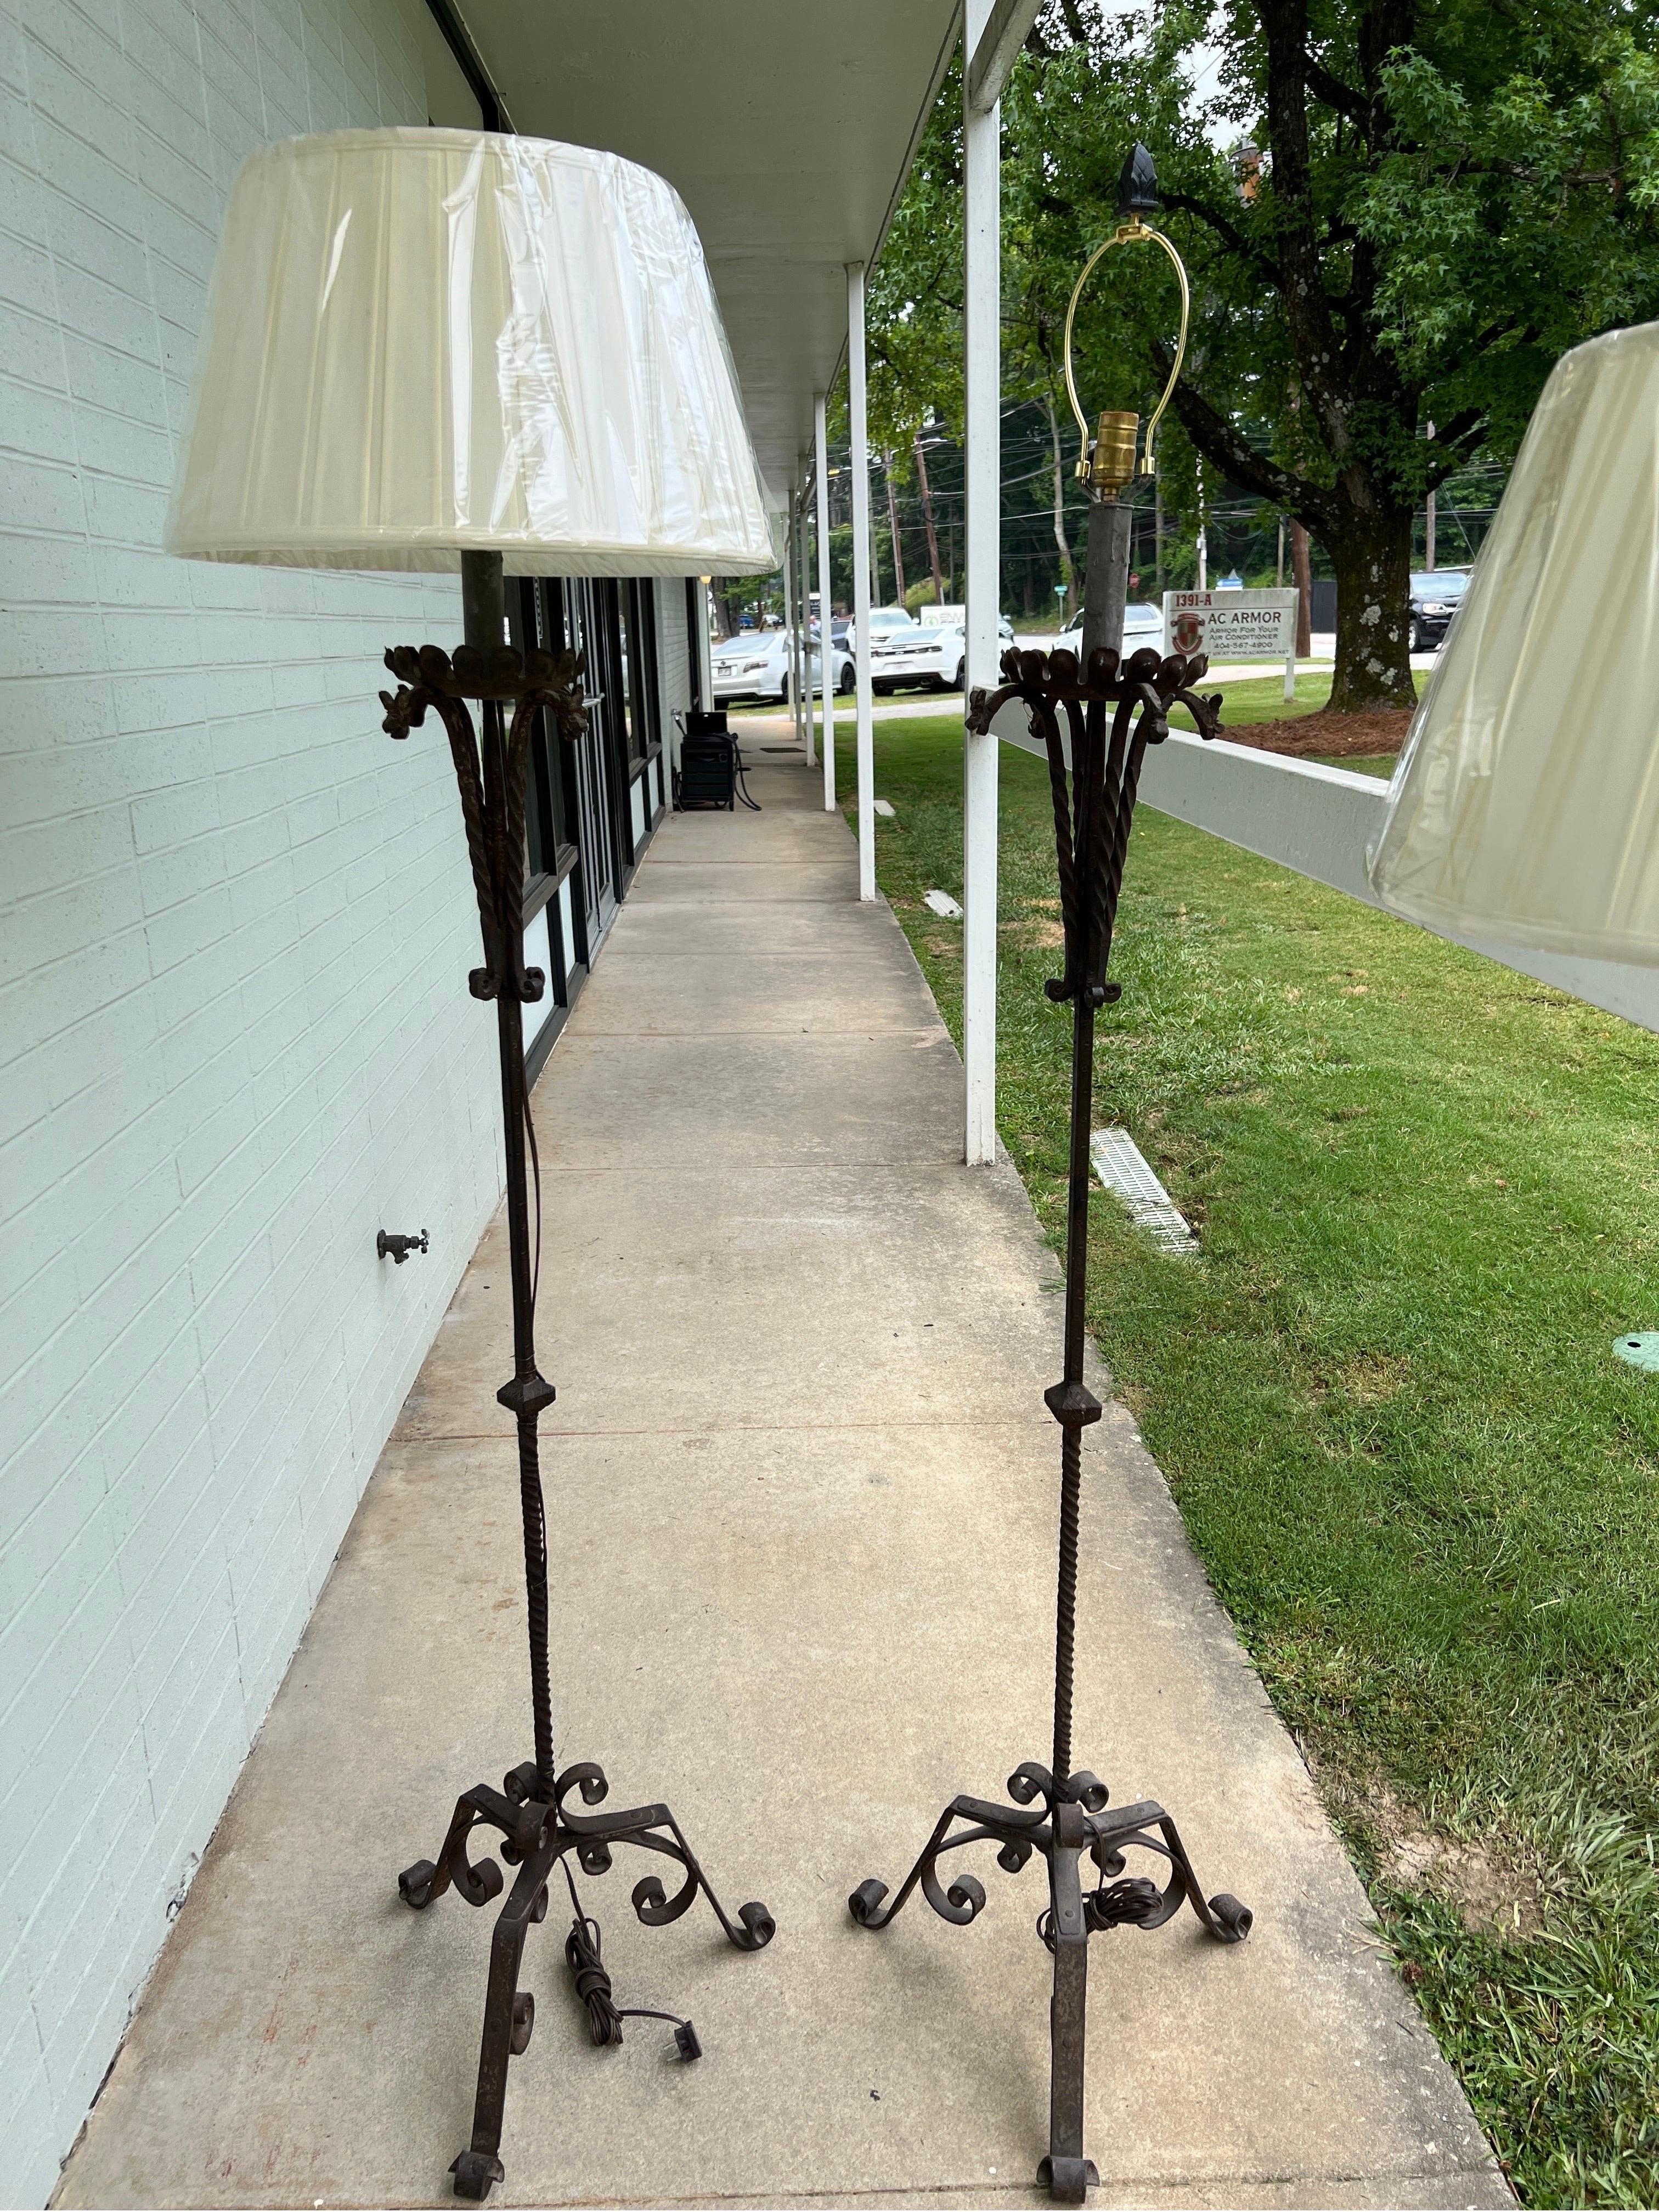 Pair, Antique Spanish Giacometti Style Sculptural Iron Floor Lamps
These antique Spanish sculptural floor lamps have a Giacometti influence from their curled feet, hand forged stem, dragon heads and distressed finish.